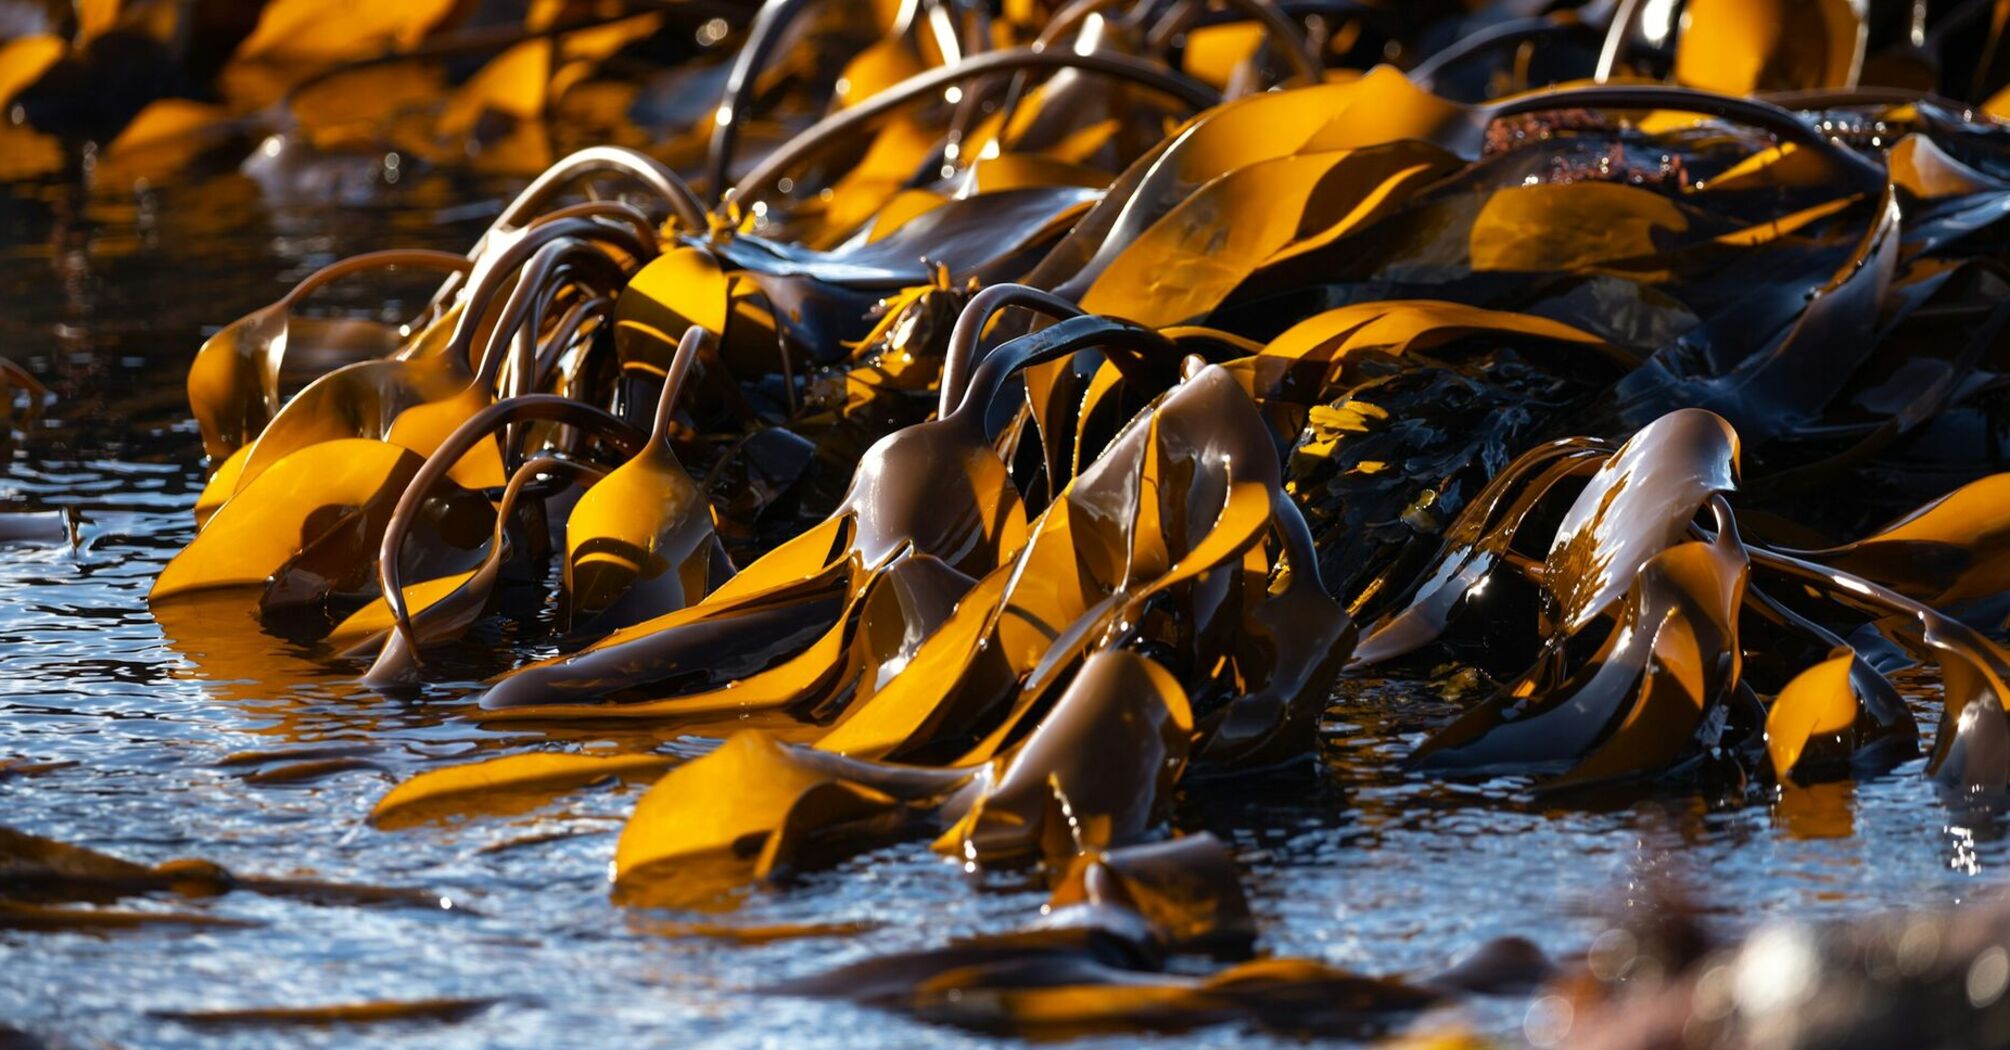 Sunlit kelp forest in shallow coastal waters, highlighting the smooth, undulating fronds of golden brown seaweed